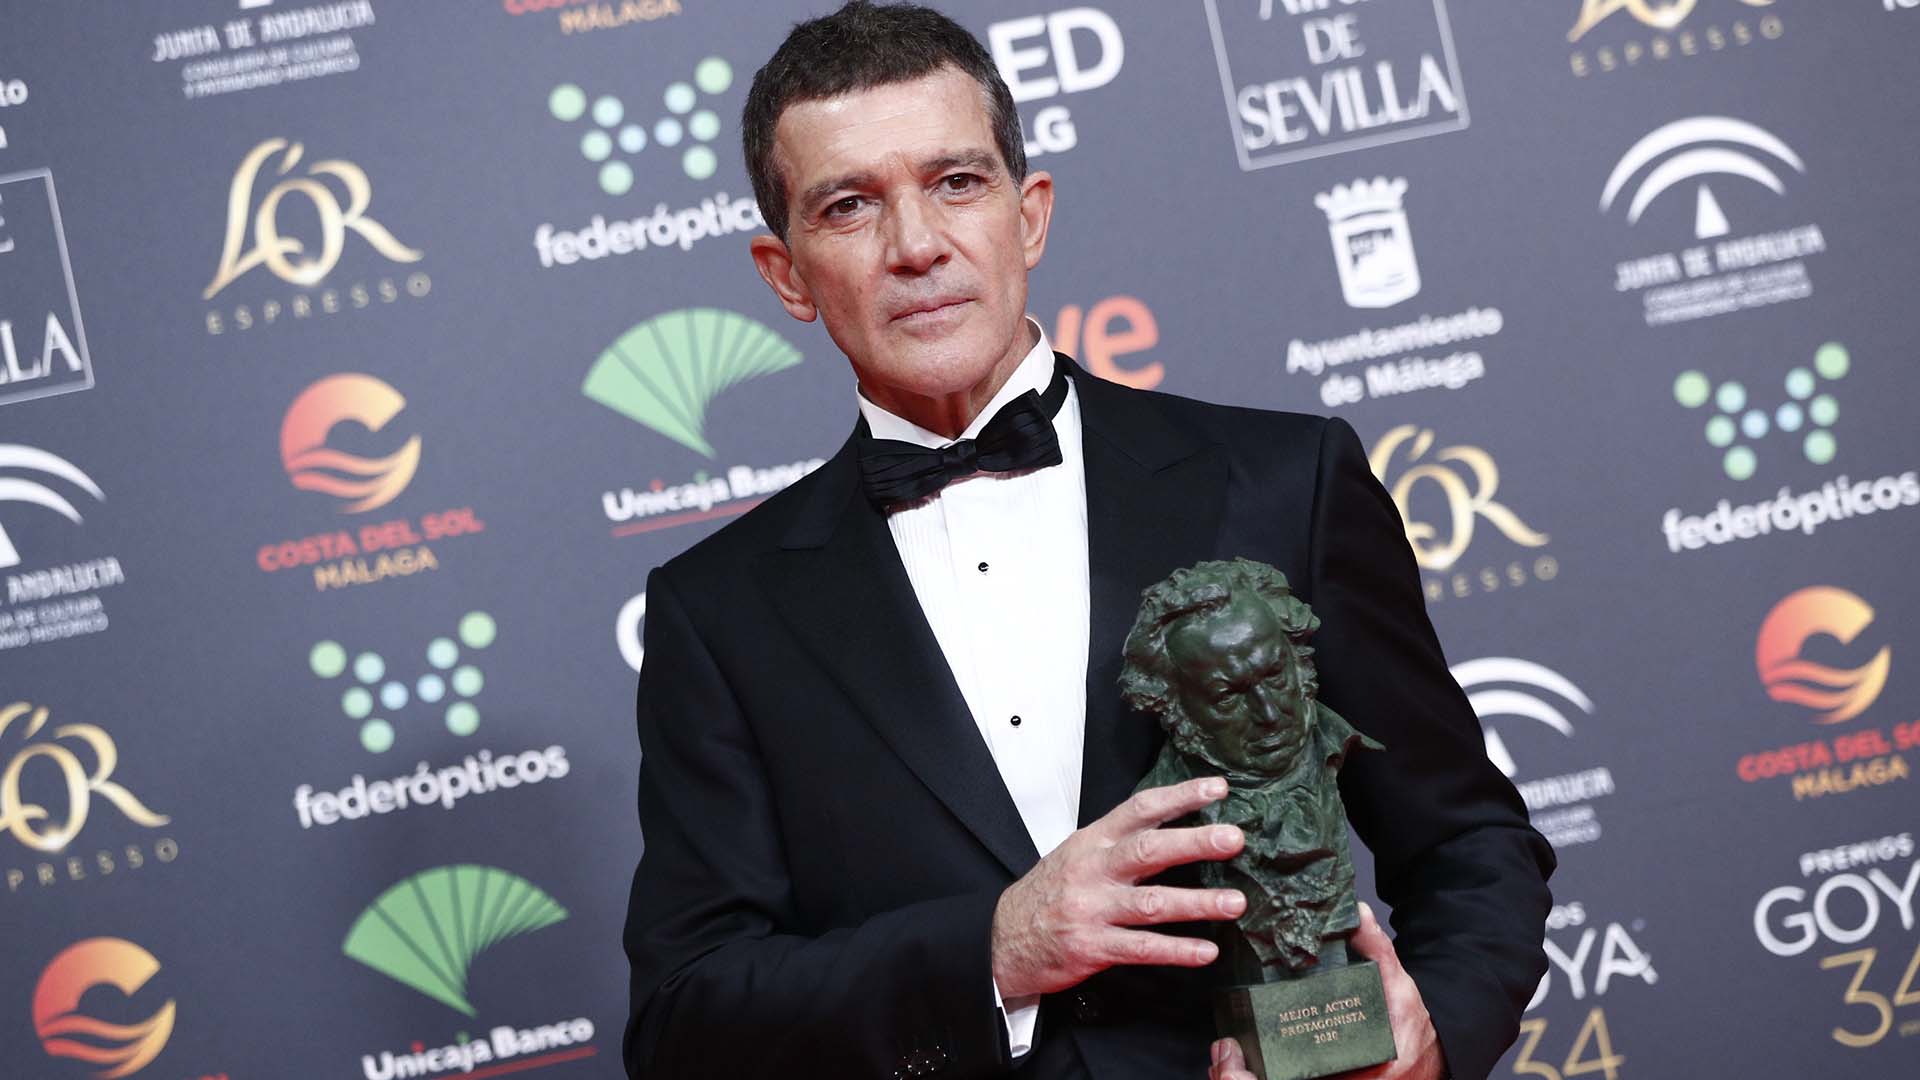 Actor Antonio Banderas in the press room during the 34th annual Goya Film Awards in Malaga on Saturday, 25 January 2020.